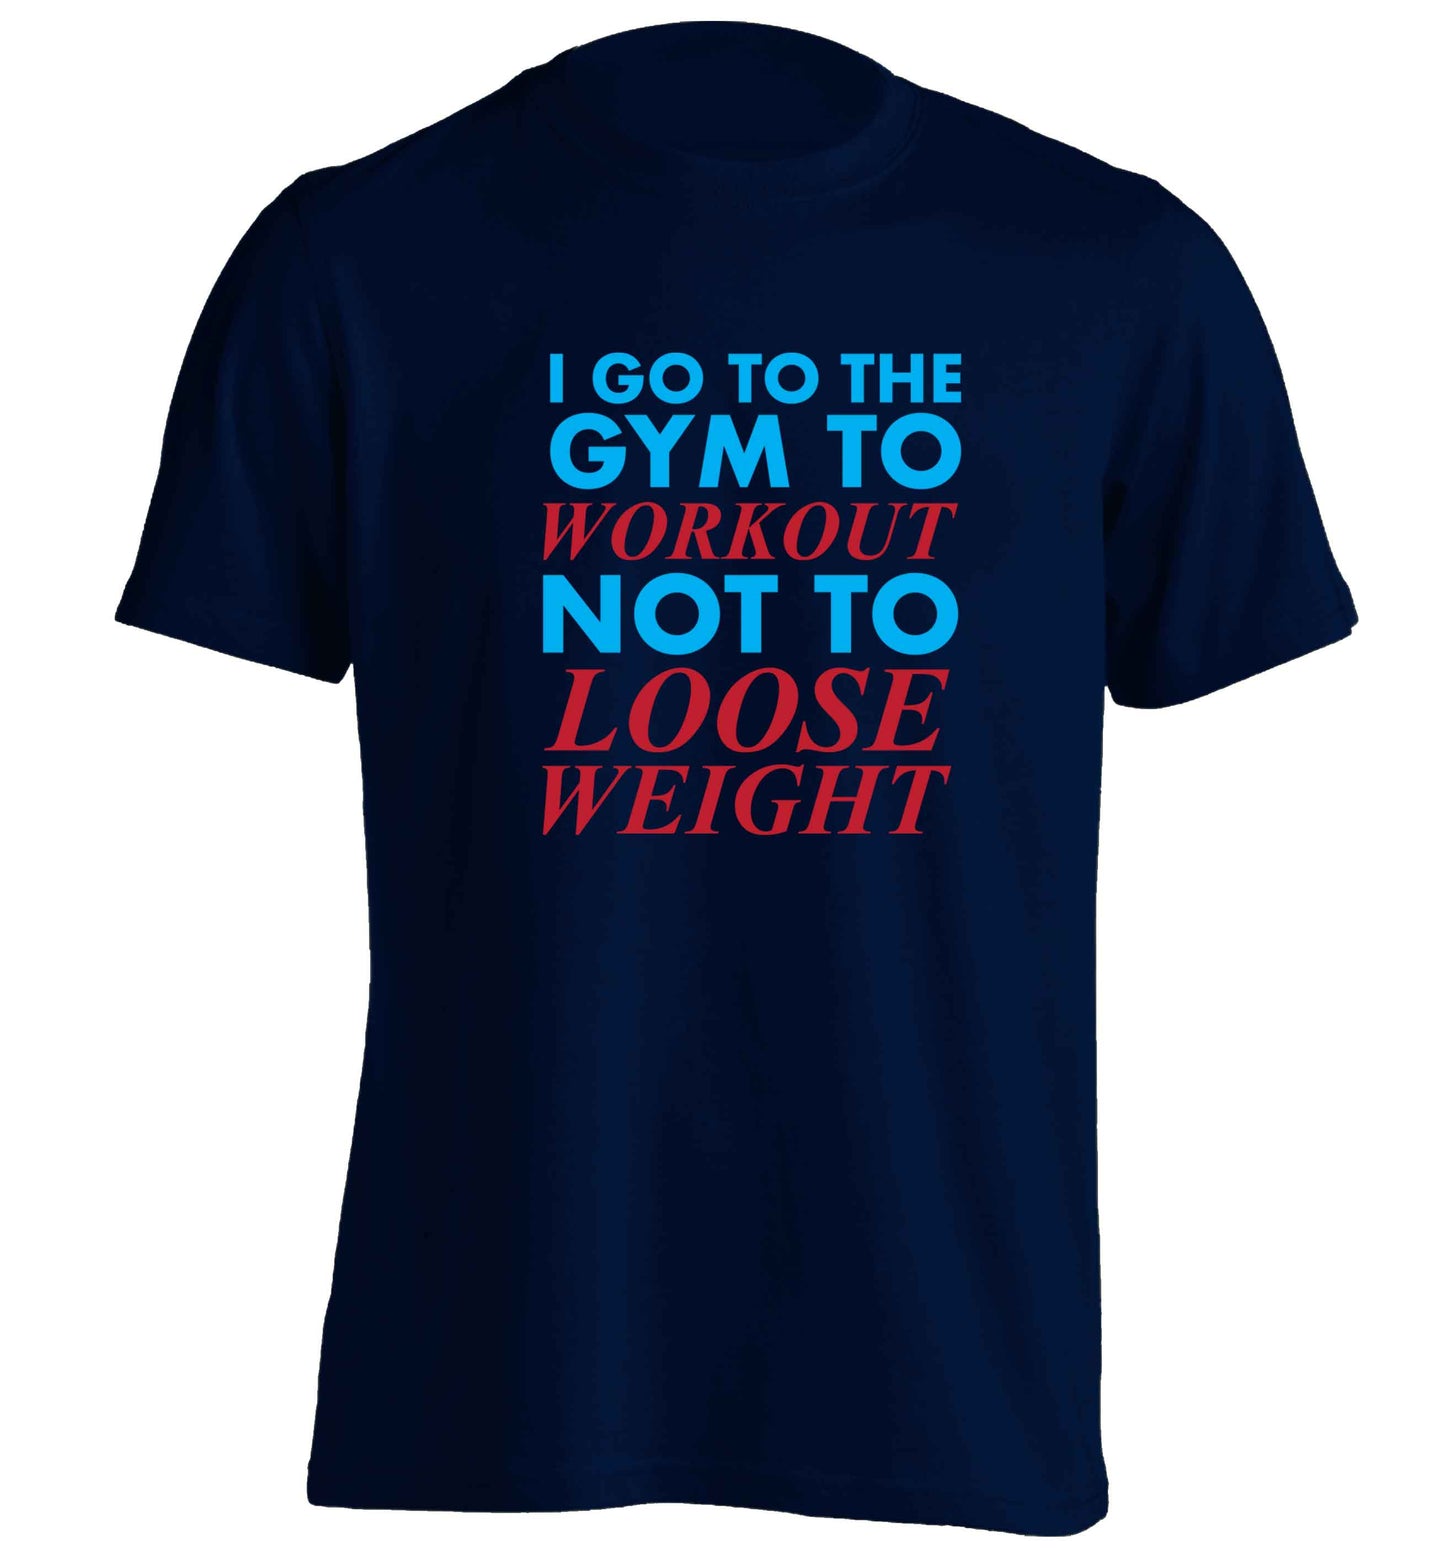 I go to the gym to workout not to loose weight adults unisex navy Tshirt 2XL